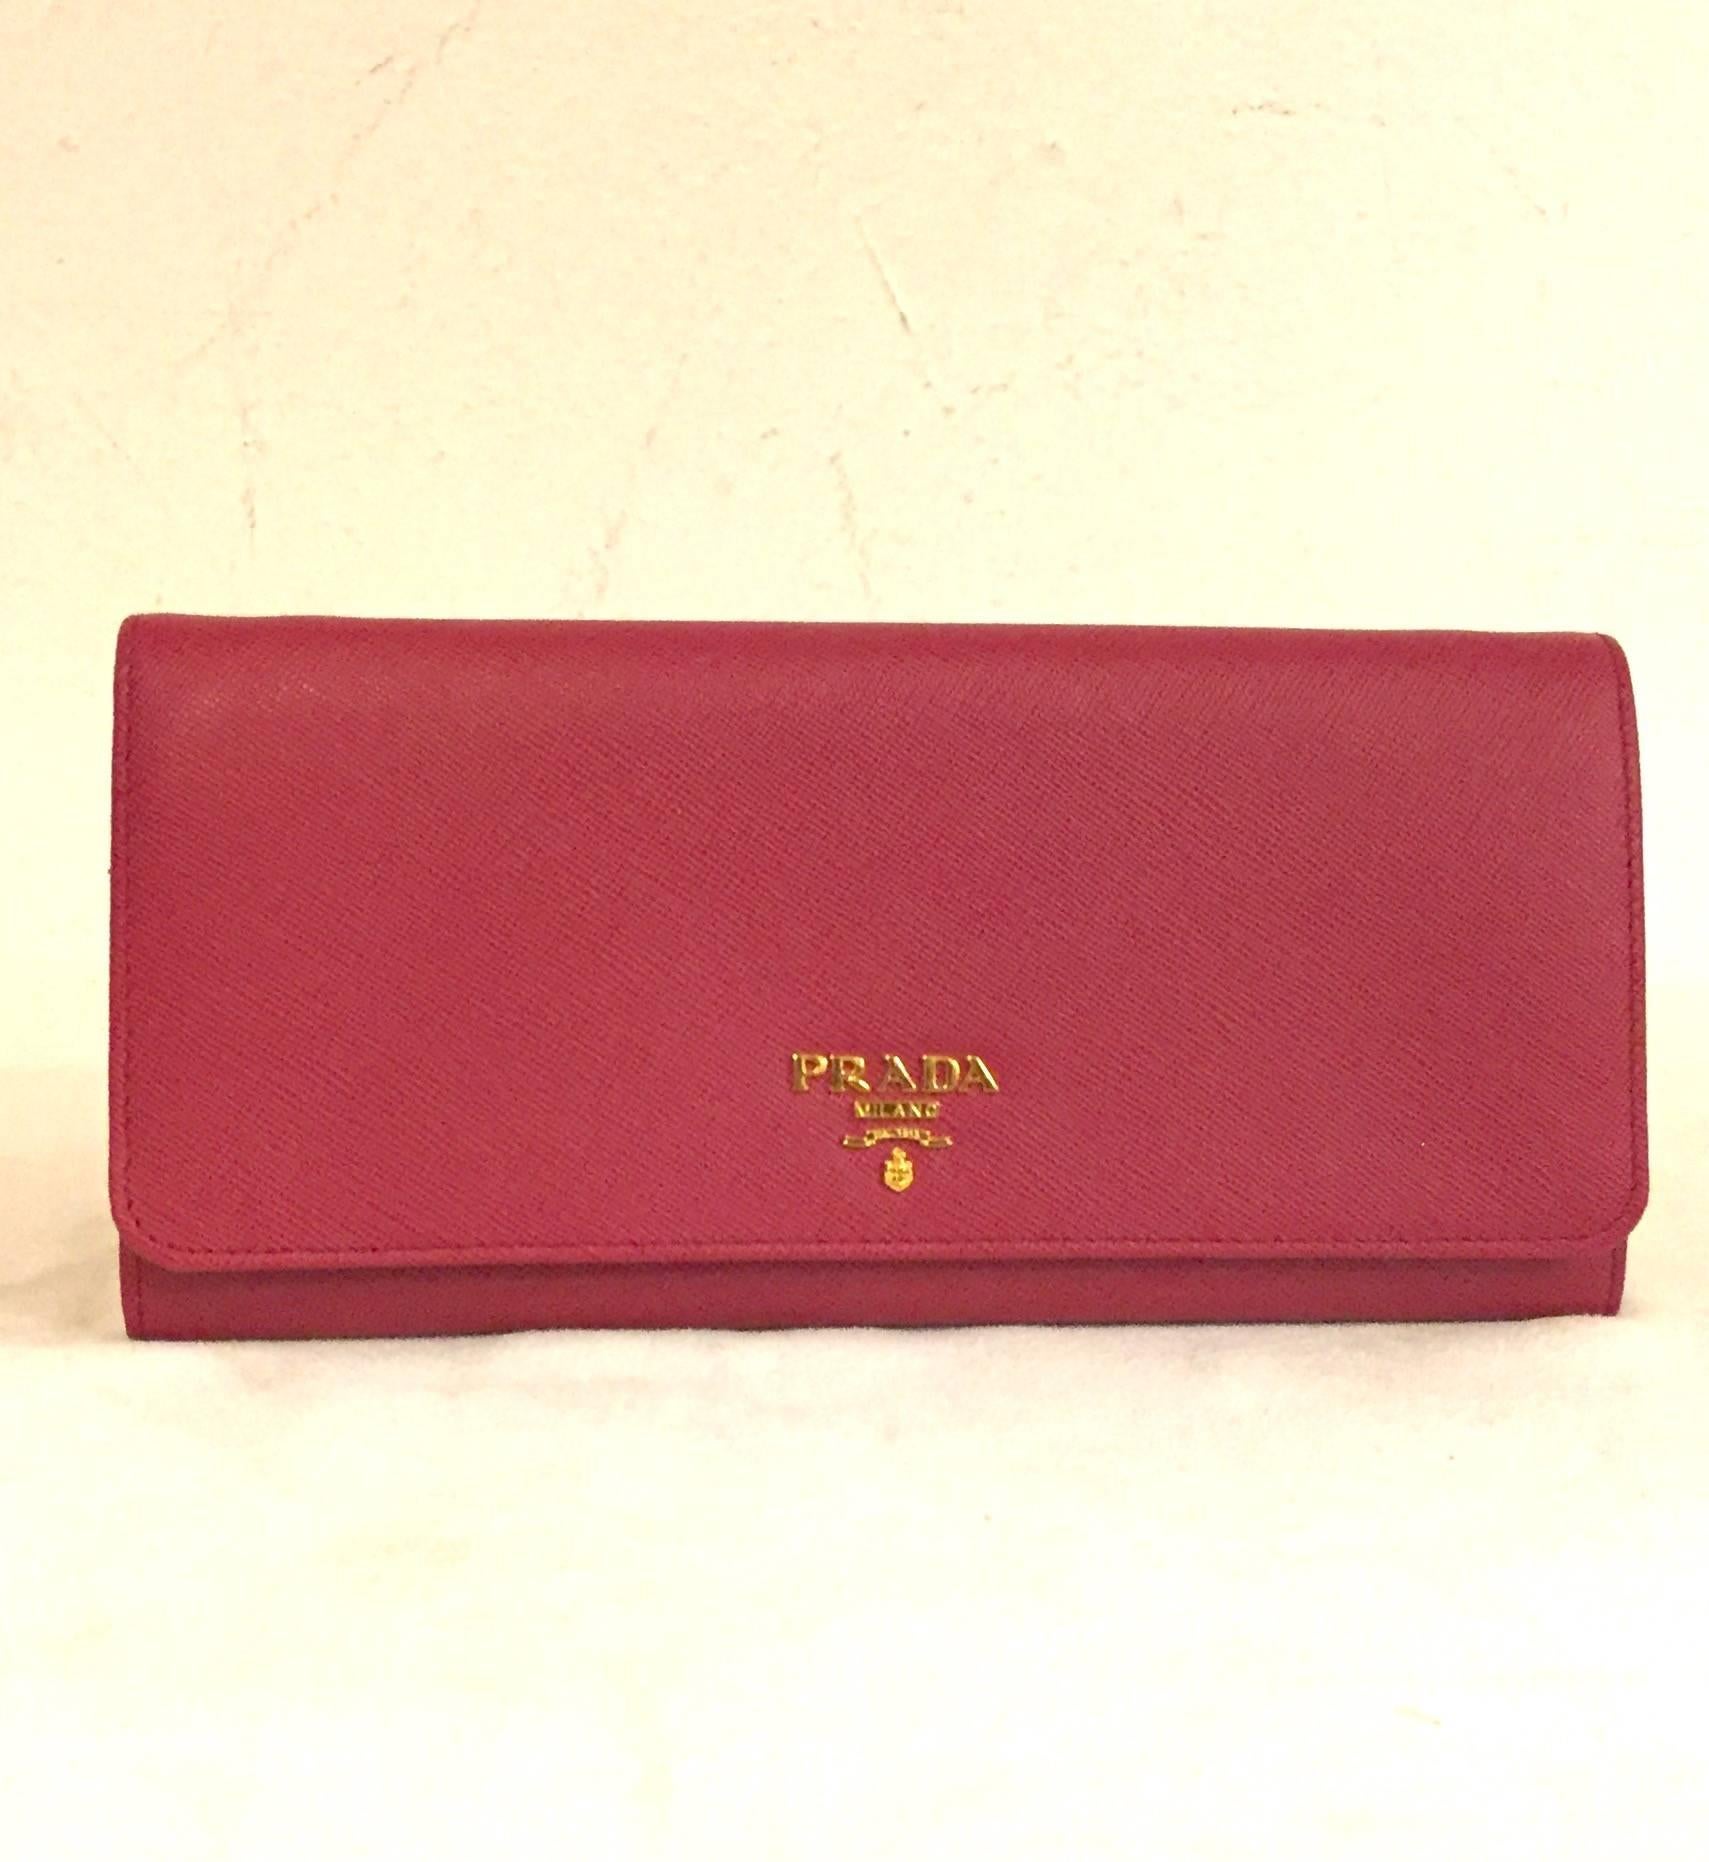 Prada Chain Crossbody Wallet is a must for travels near and far!  Features signature saffiano leather in flirtatious fuchsia, front flap and gold tone leather interwoven chain.  Snap closure reveals interior with several compartments that maintain